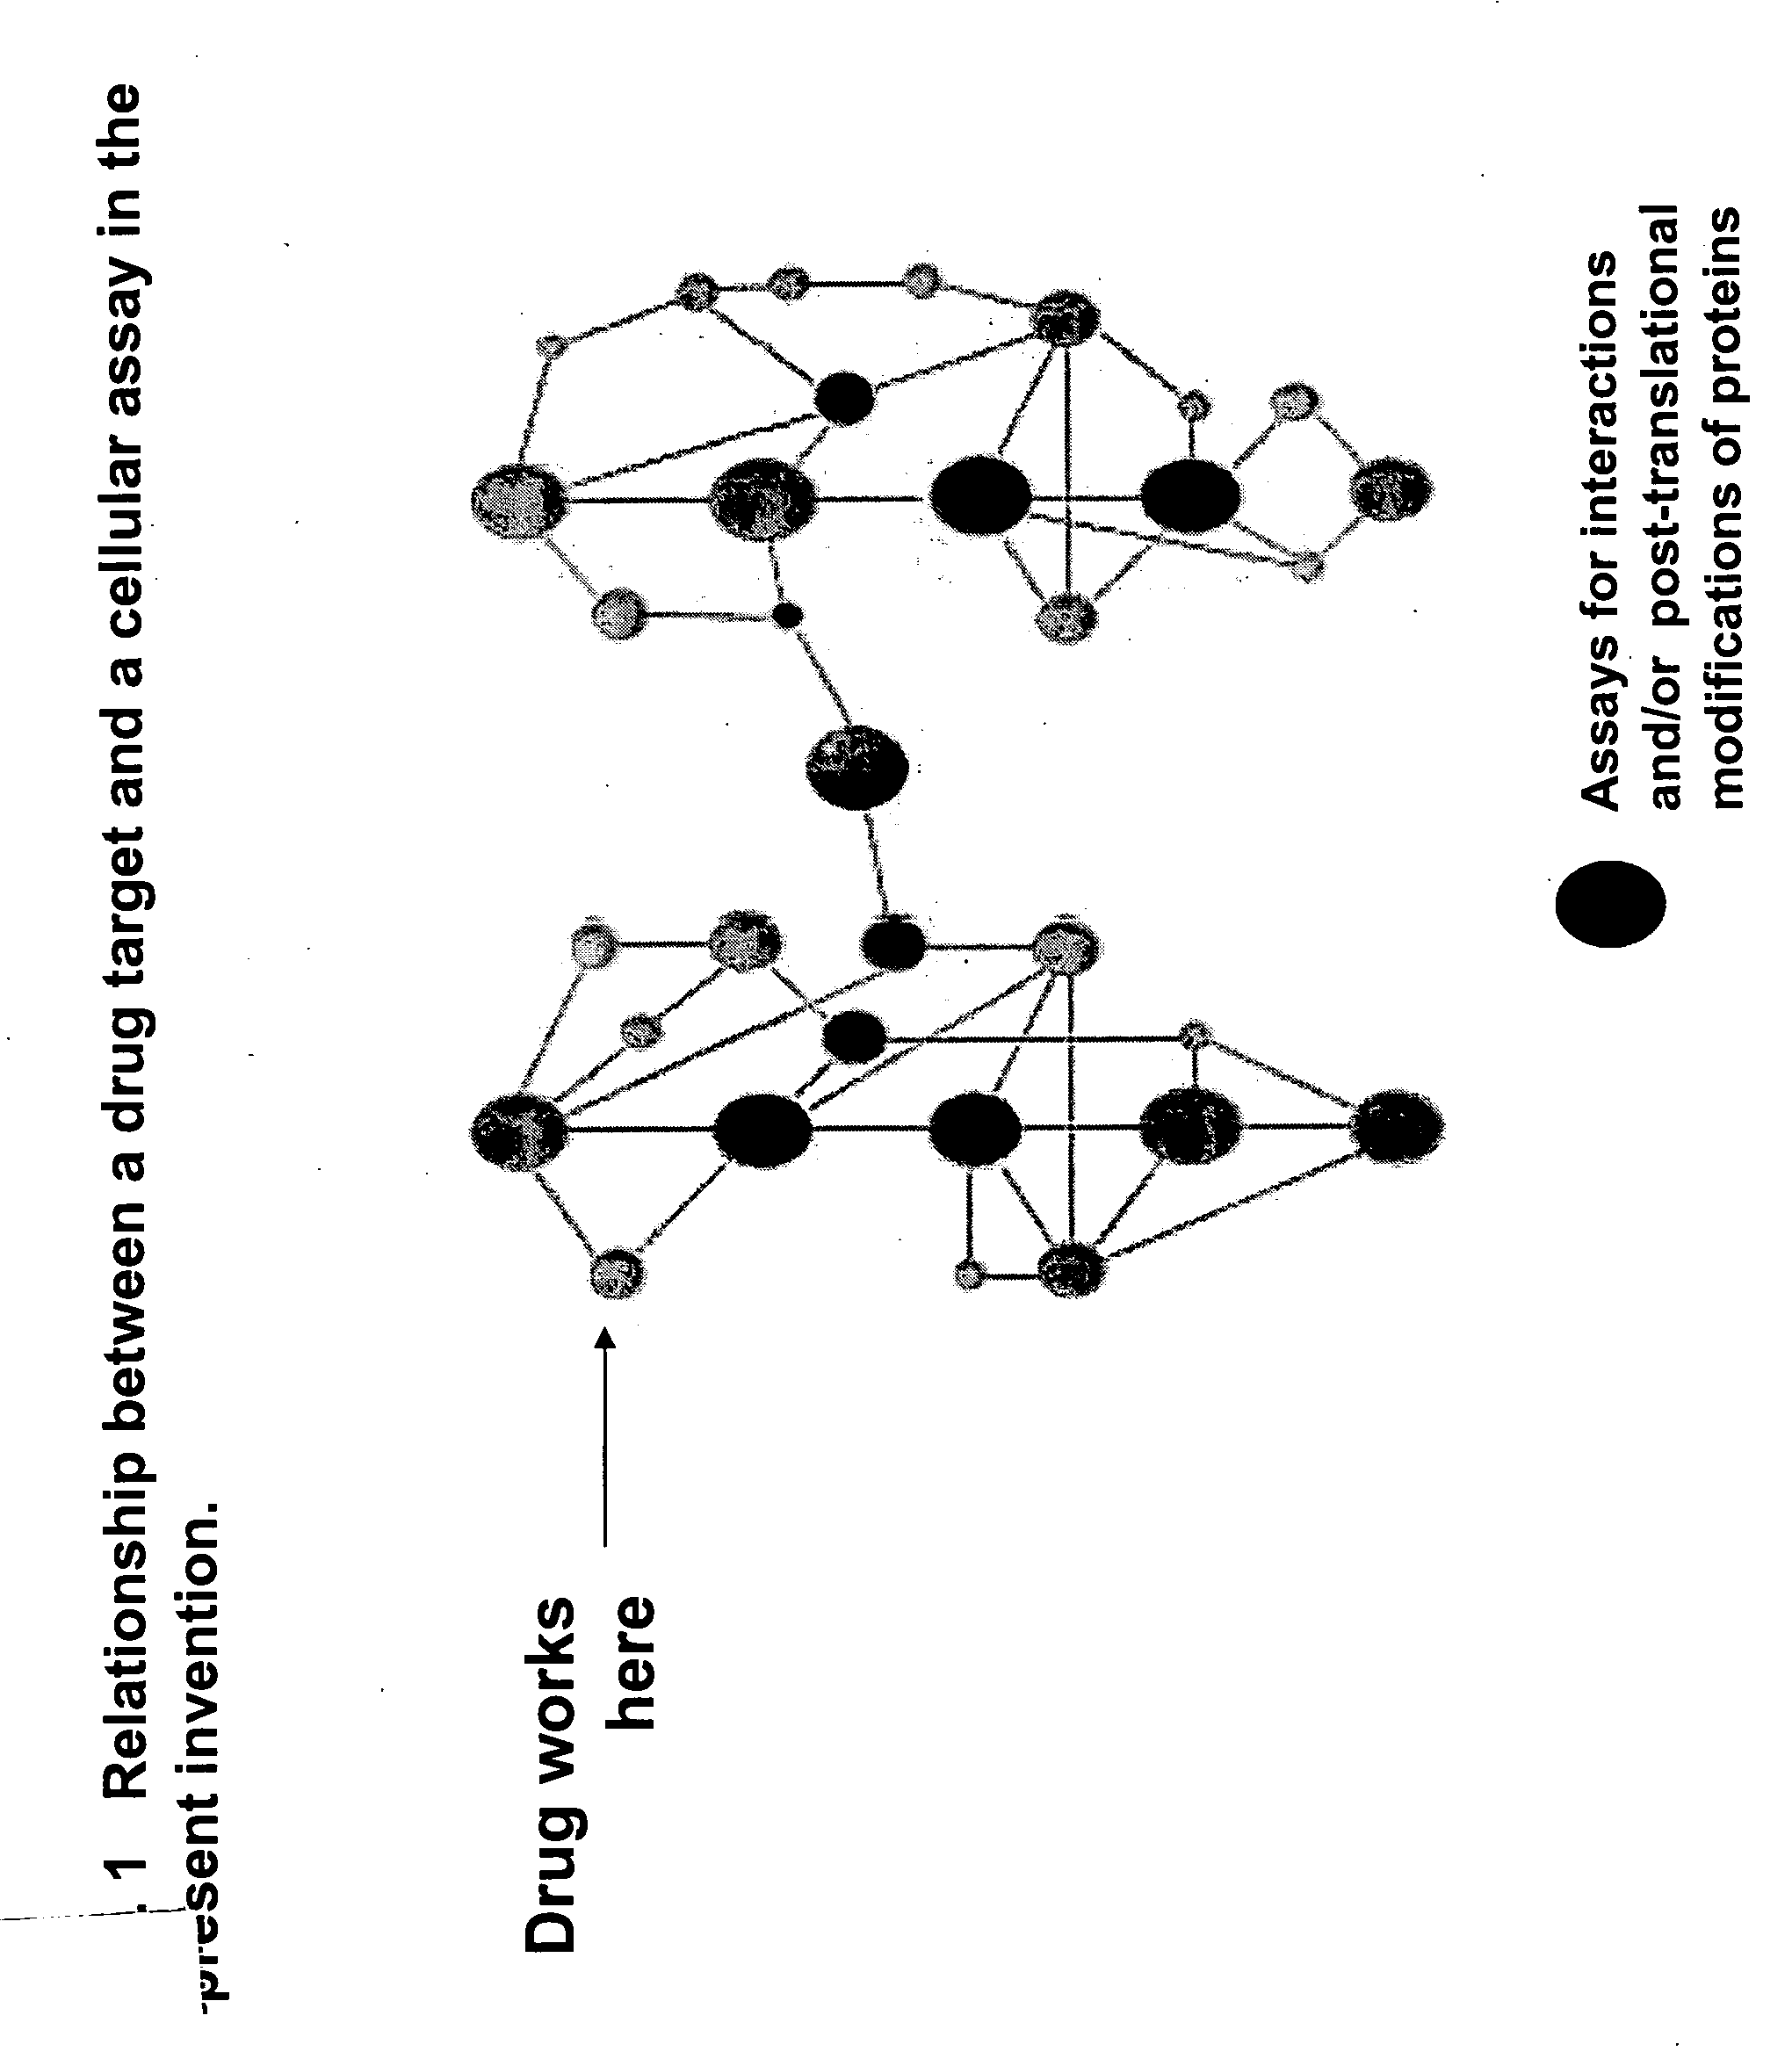 Methods for identifying new drug leads and new therapeutic uses for known drugs